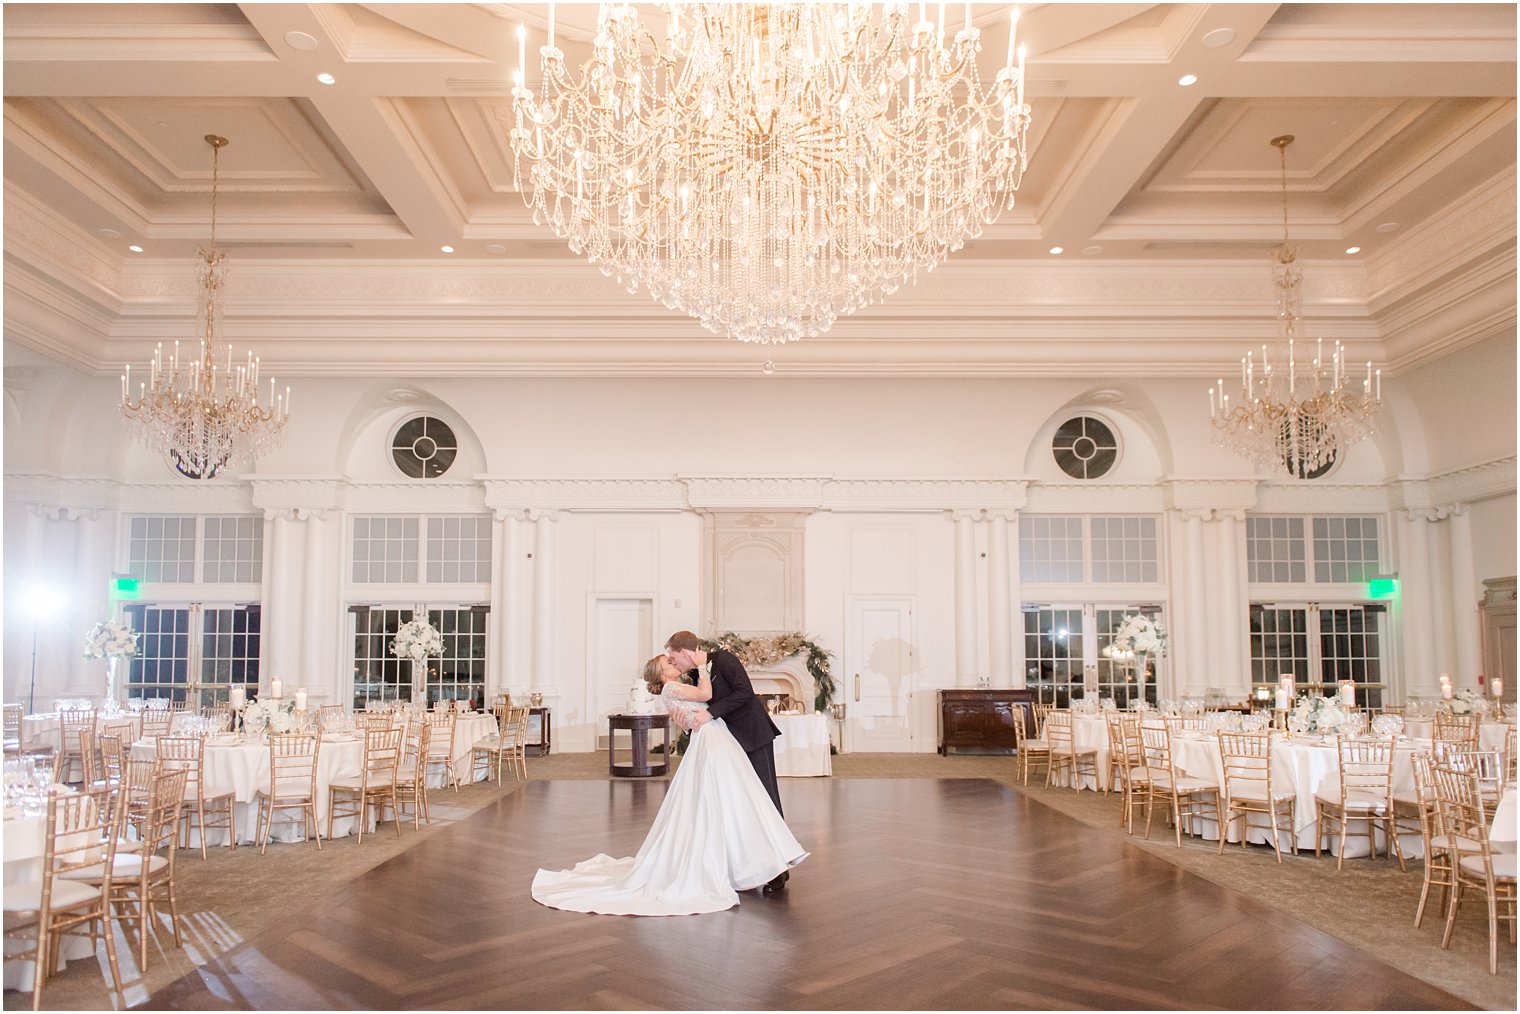 Bride and groom dancing in ballroom at Park Chateau Estate | Winter wedding by Idalia Photography Associates